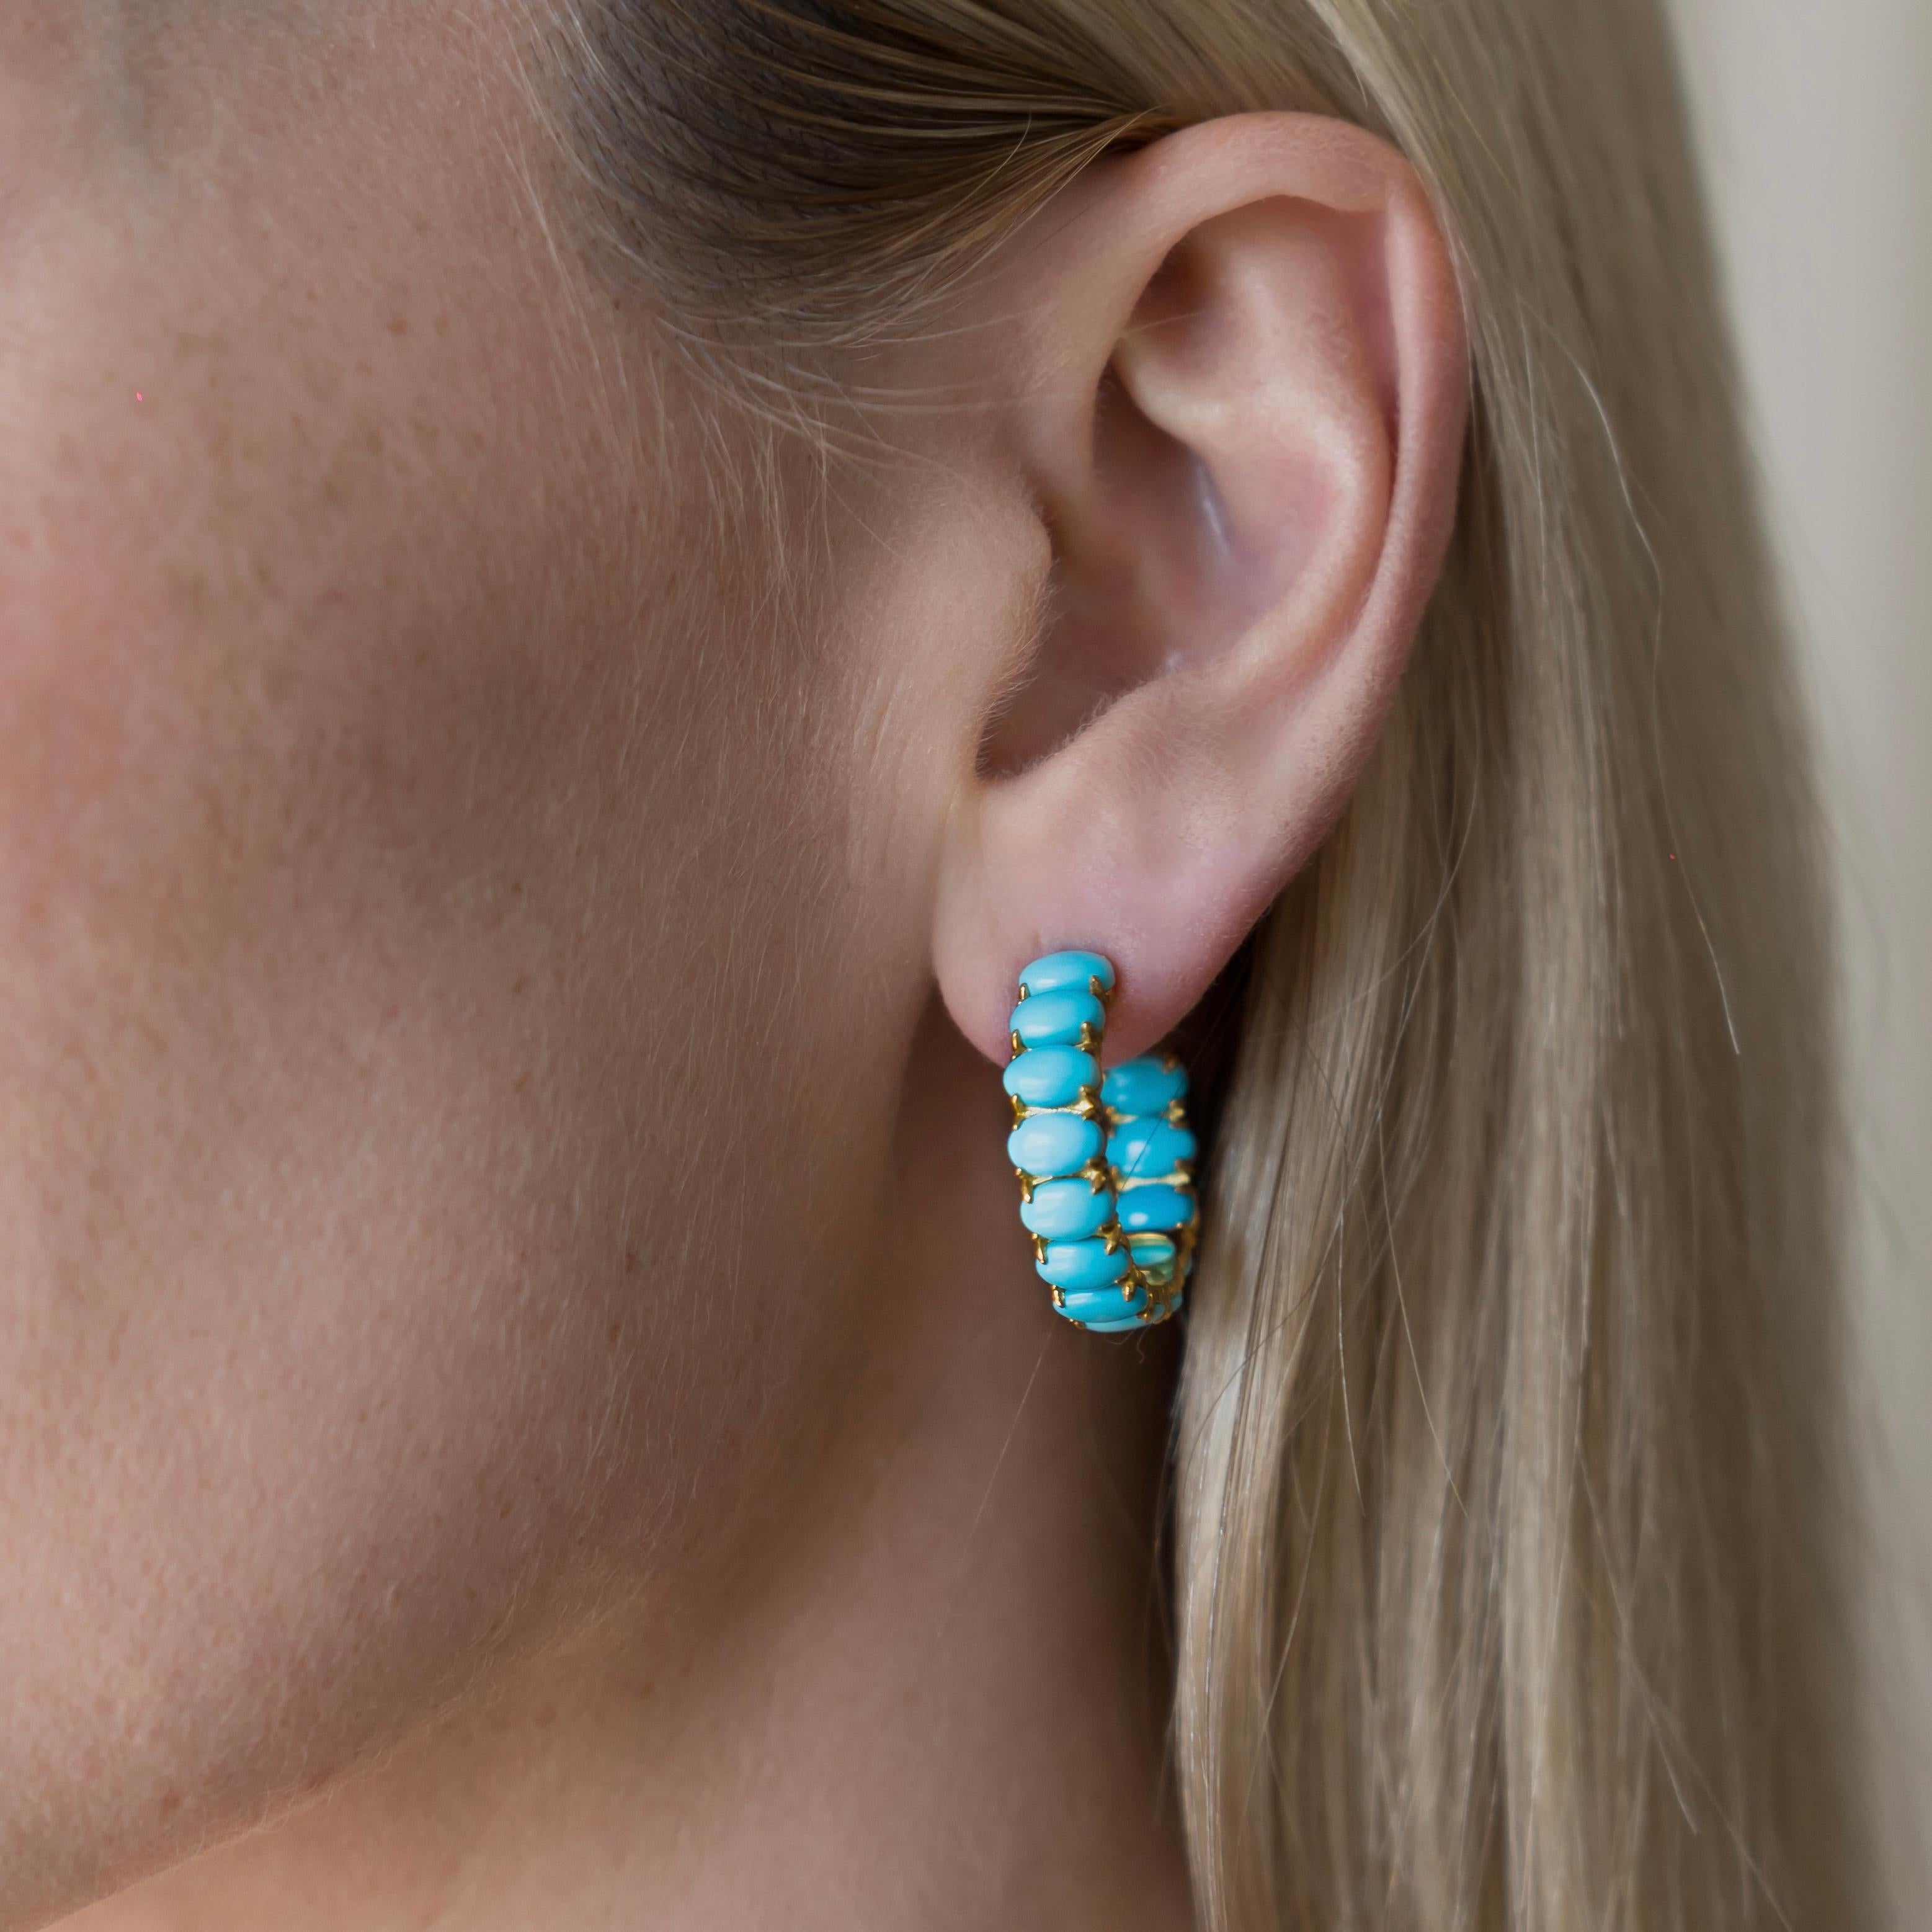 Nina Zhou's 10.96ctw Turquoise Inside-out Hoop Earrings in 14k yellow gold encapsulate vibrant elegance with a modern twist. Crafted meticulously, these stunning hoops showcase richly hued, 10-carat turquoise gemstones set both inside and outside,